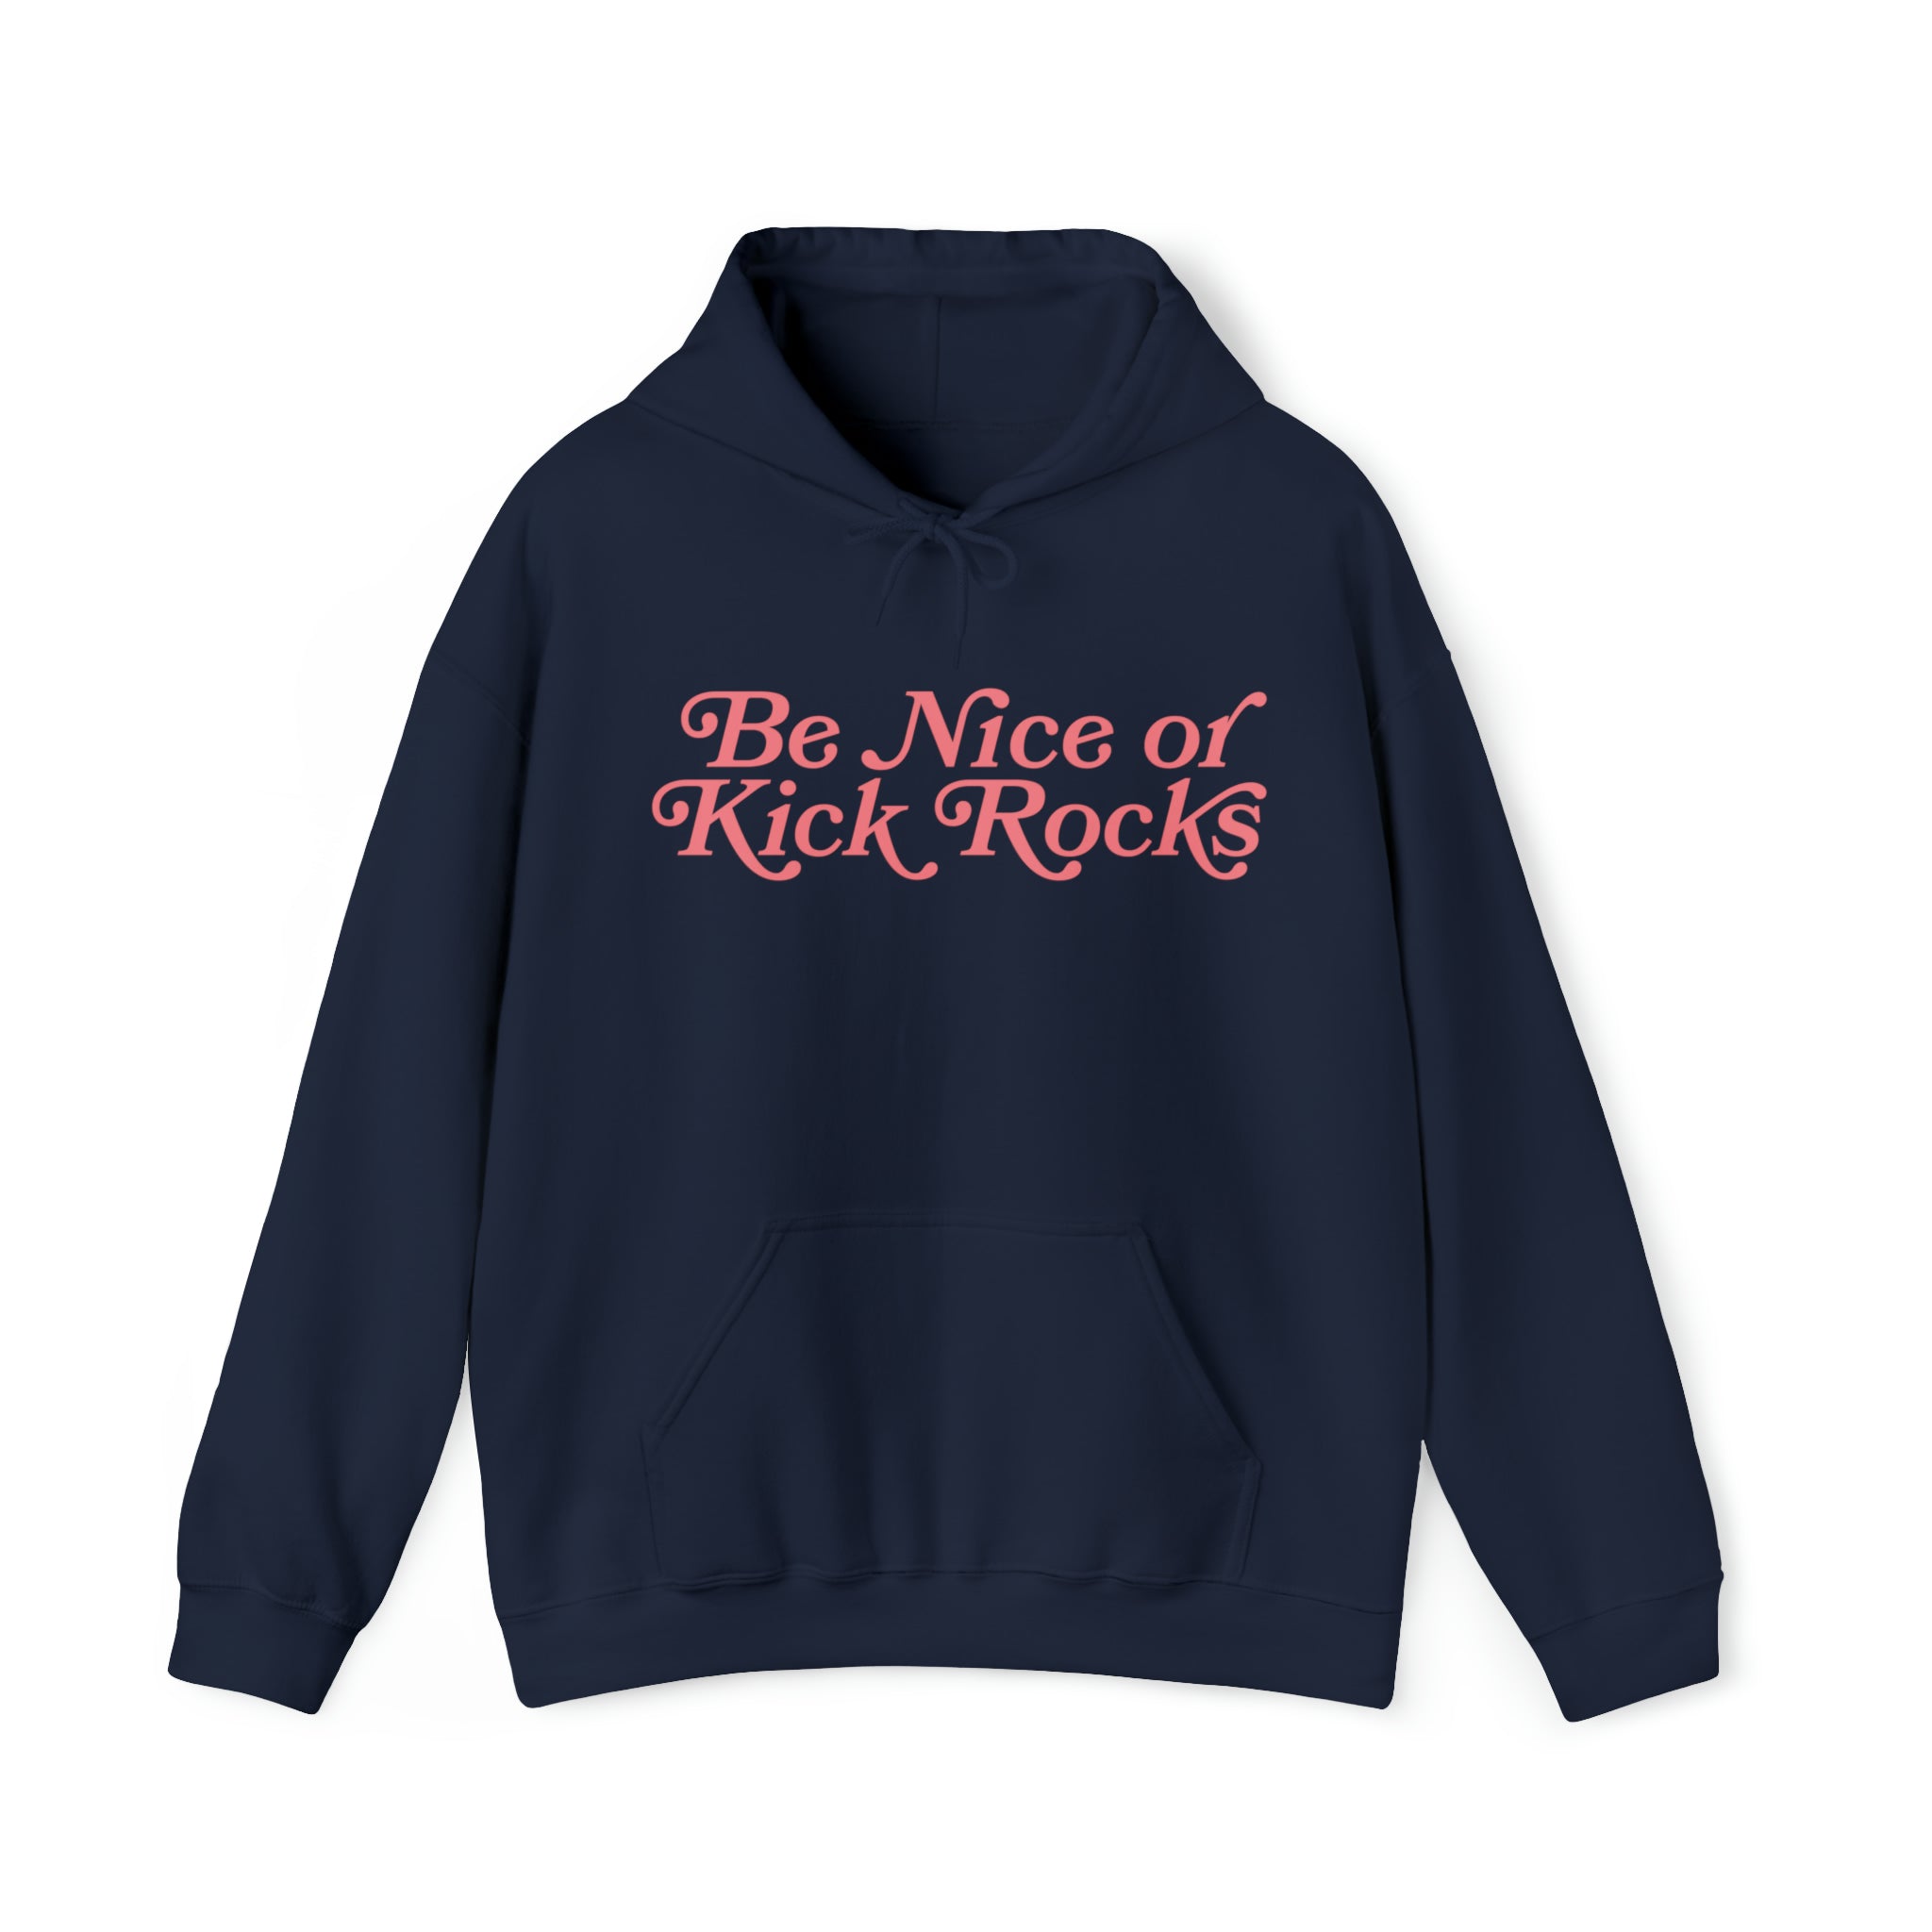 Quality Sweatshirt with Motivational Quote – Be Nice or Kick Rocks